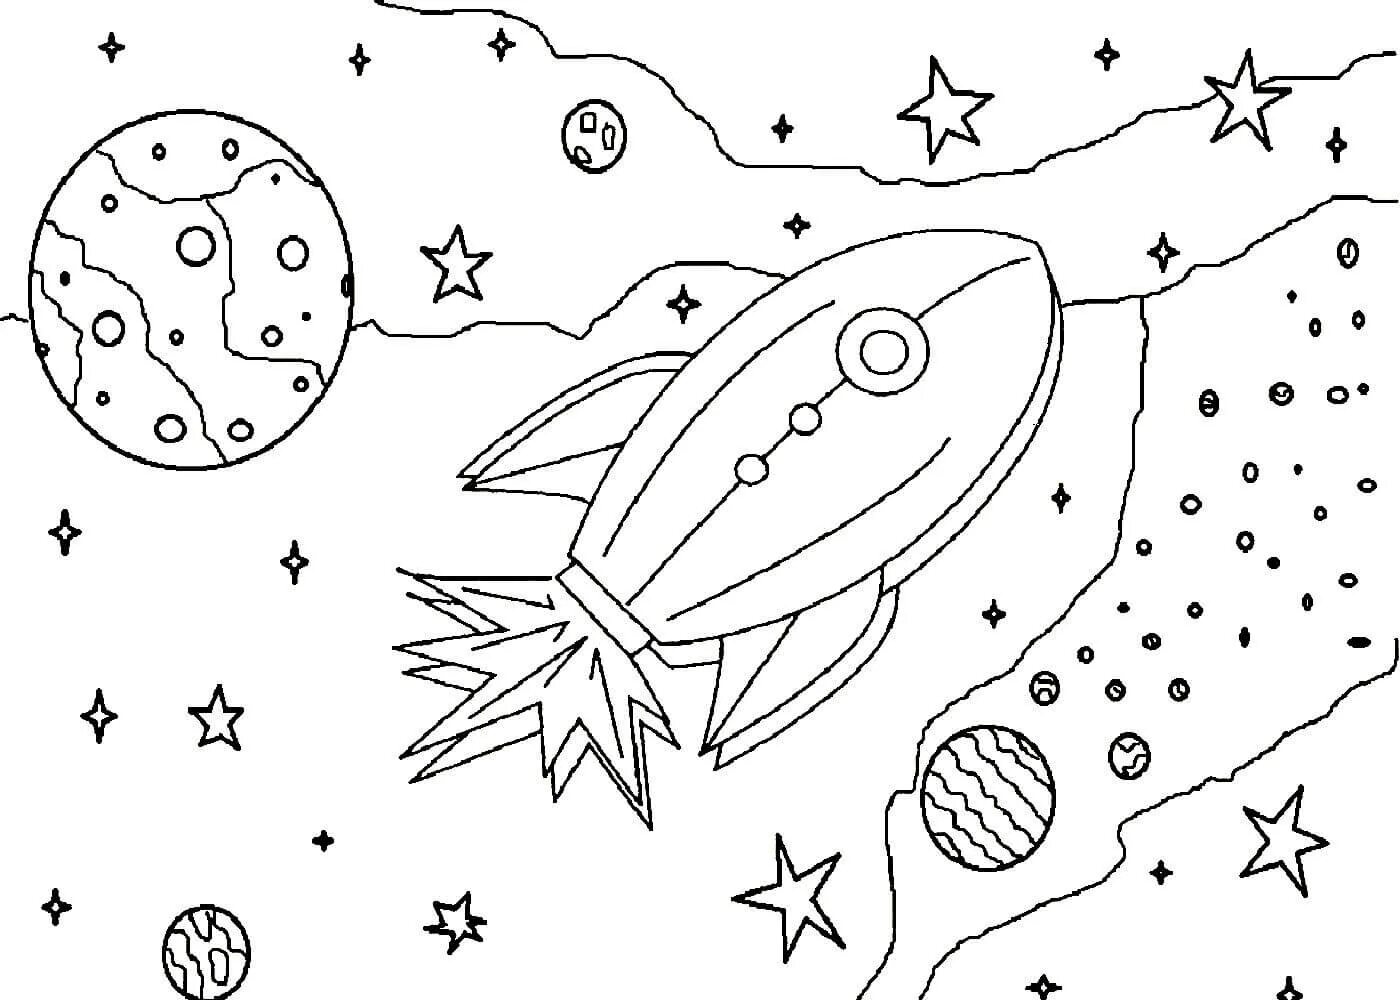 1st grade space inspirational coloring book